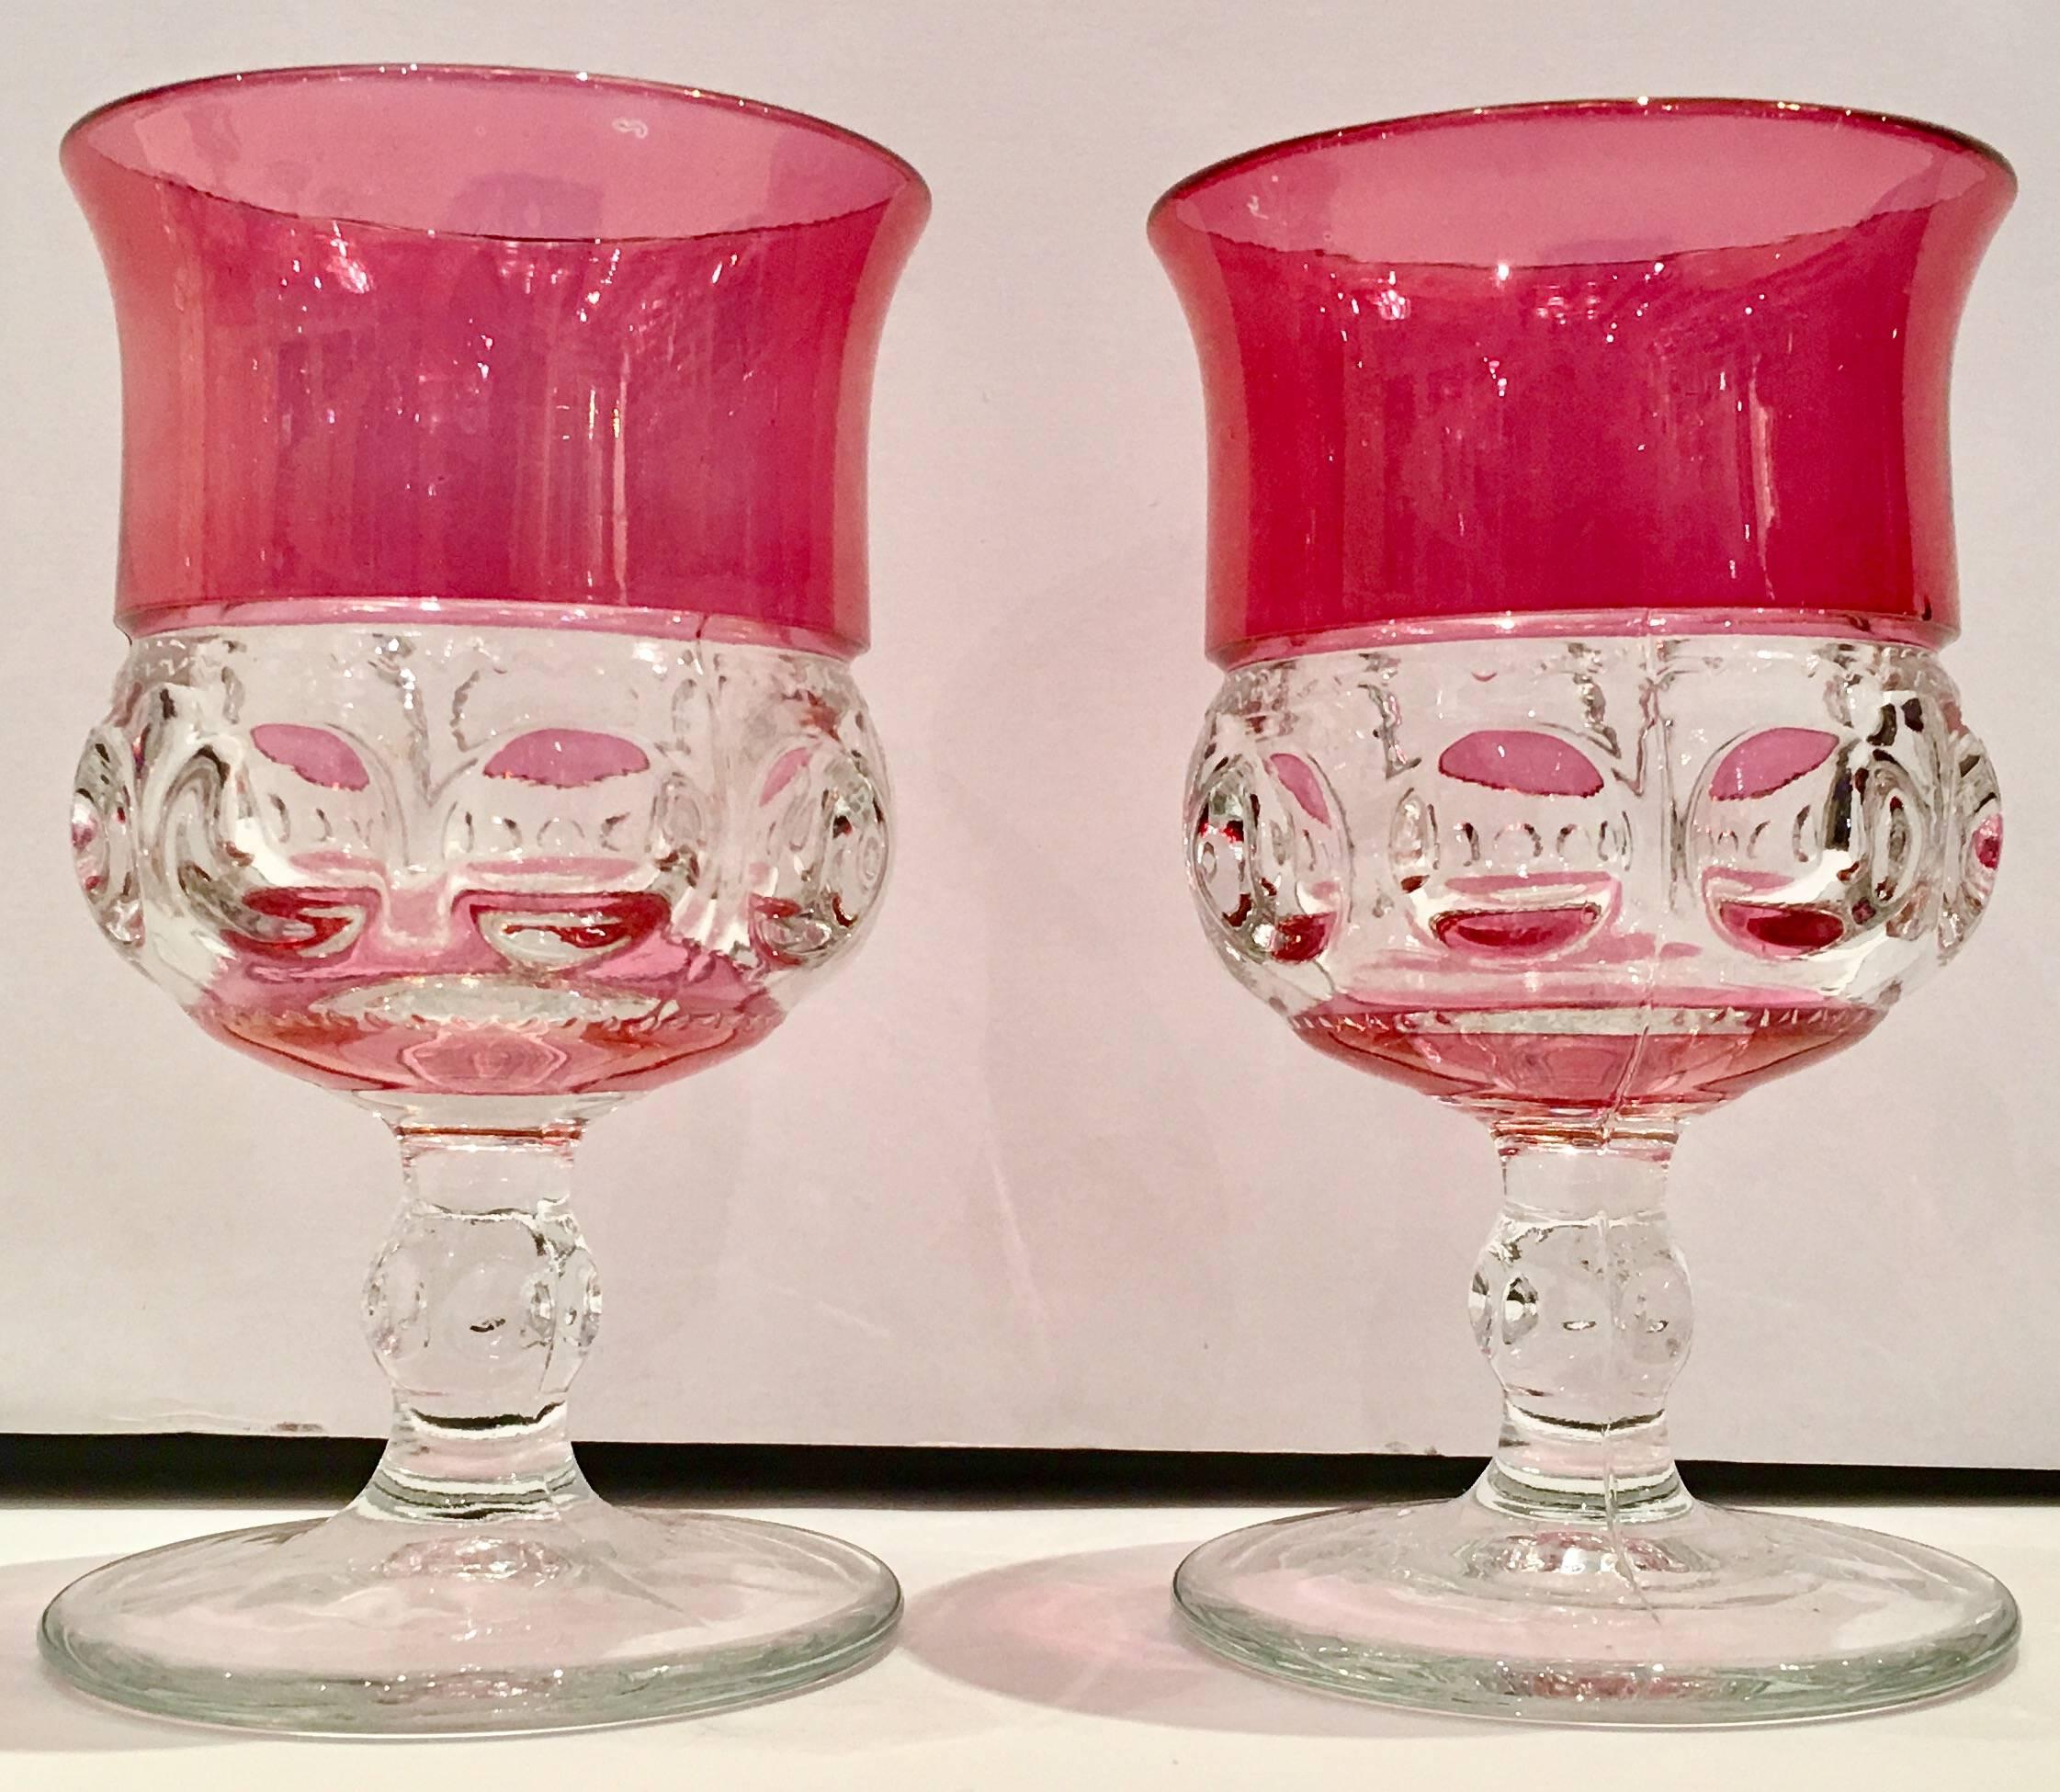 1960s set of six American ruby-pink iridescent cut crystal thumbprint stem glasses. These Classic American collectible glass was manufactured by, The Tiffan Glass Co. cut to clear 